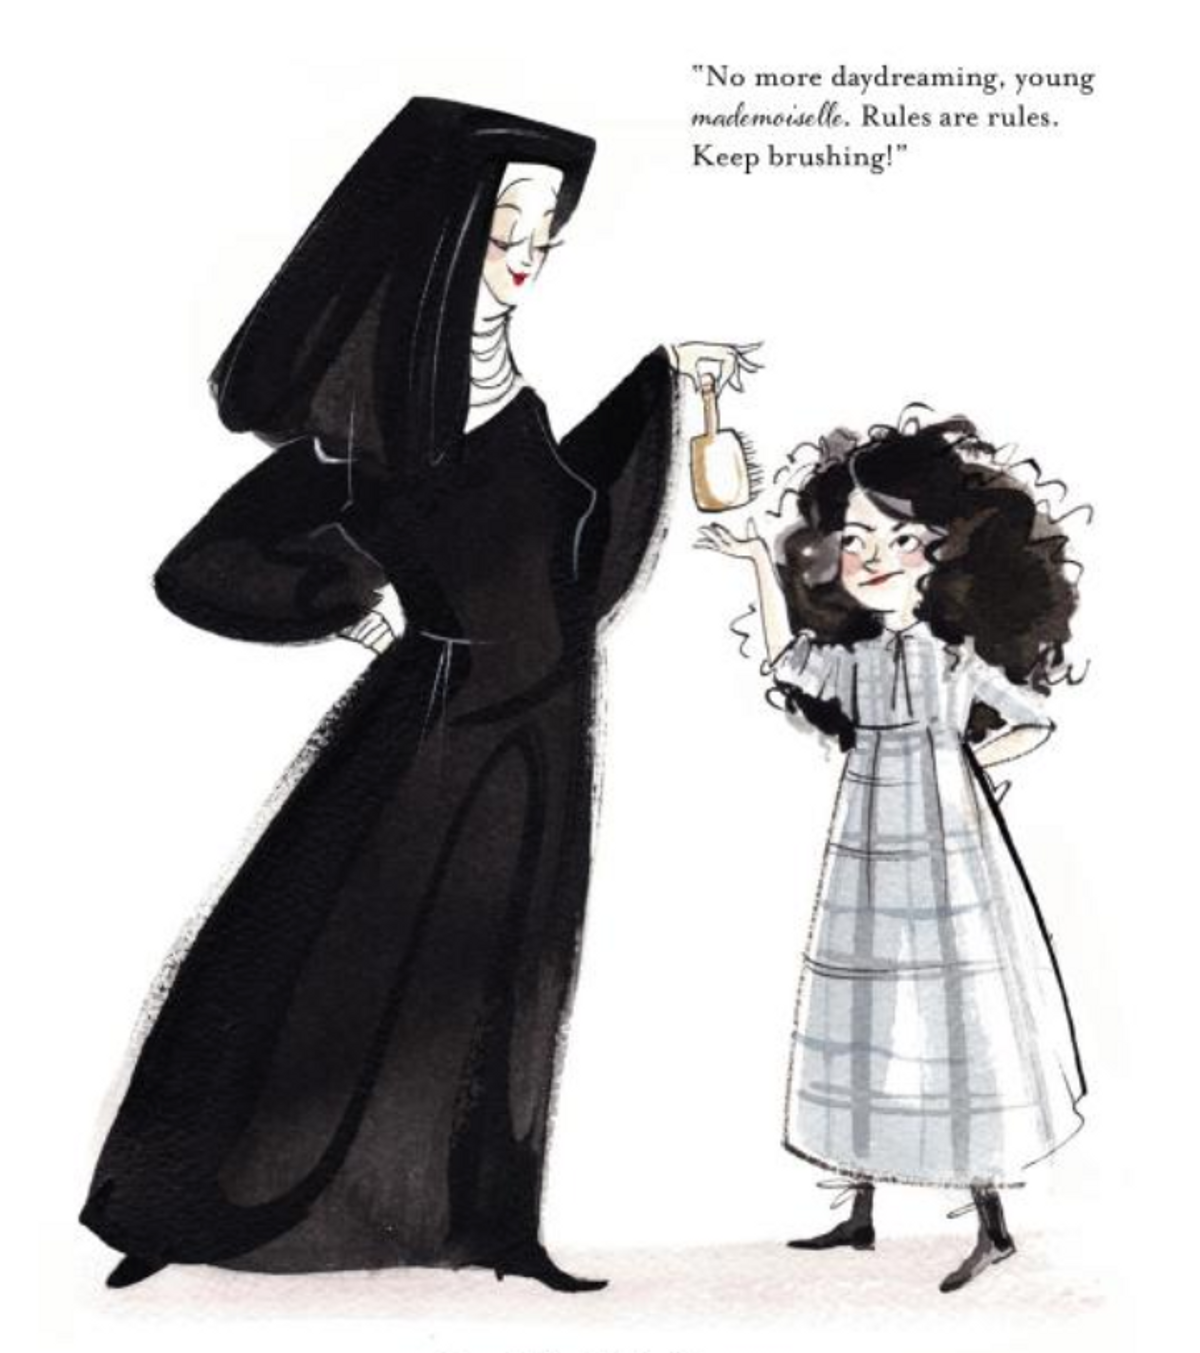 From ‘Along Came Coco,’ by Eva Byrne (Harry N. Abrams Publishers)